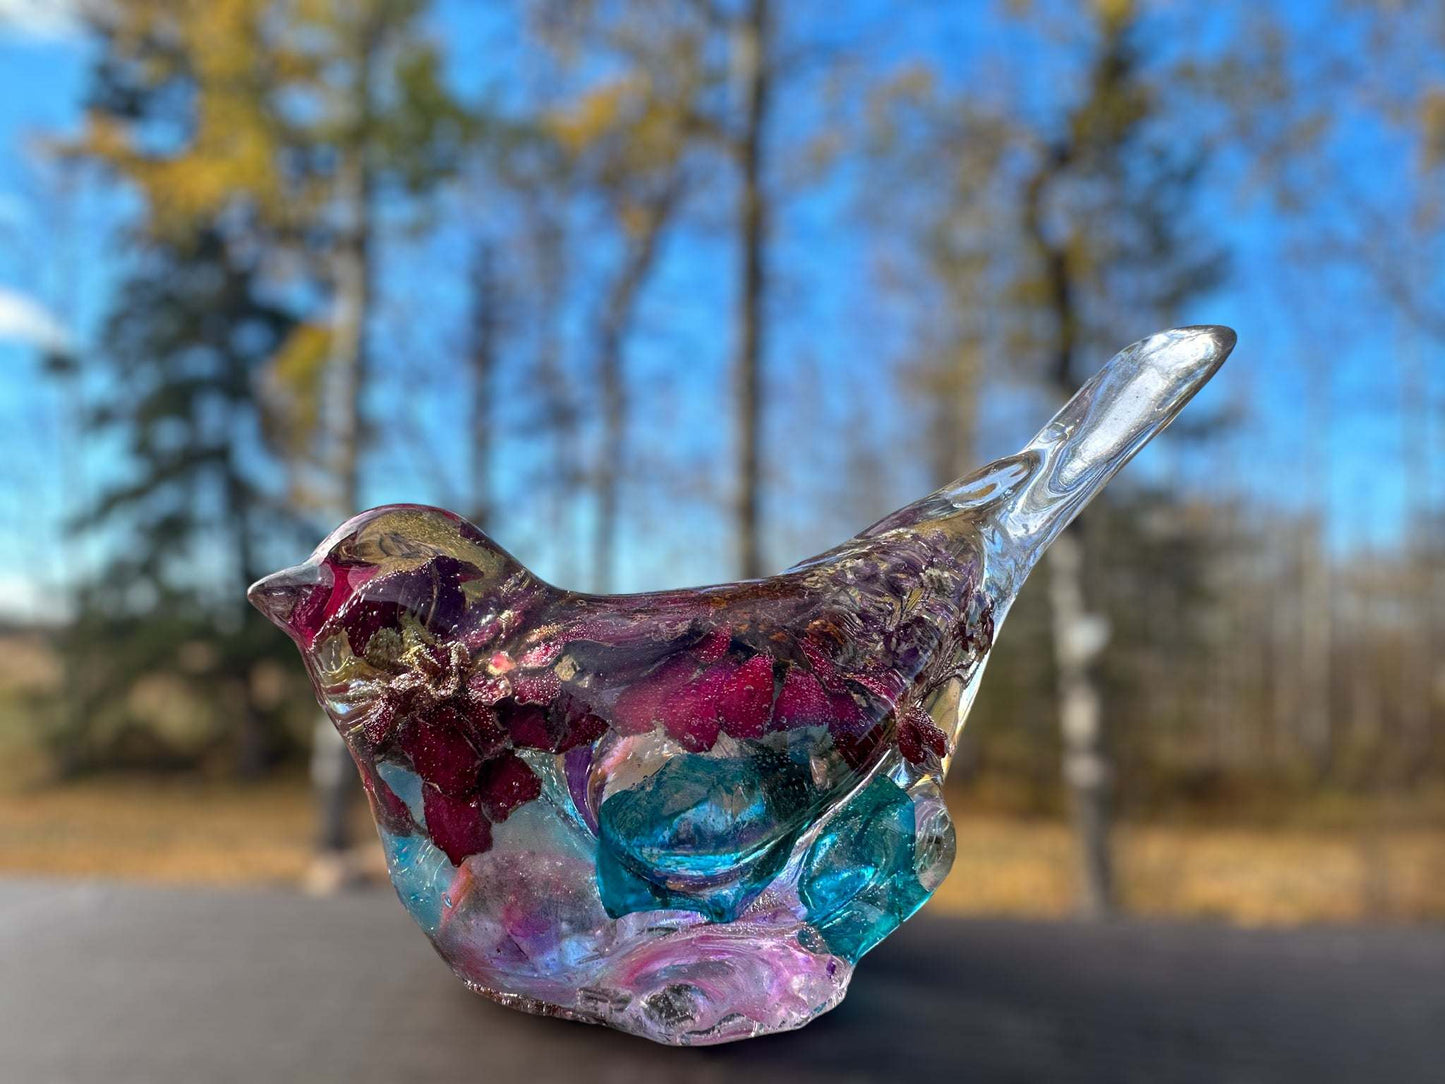 Bird Blooms in Flight: Resin Filled with Dried Flowers - Home Decor